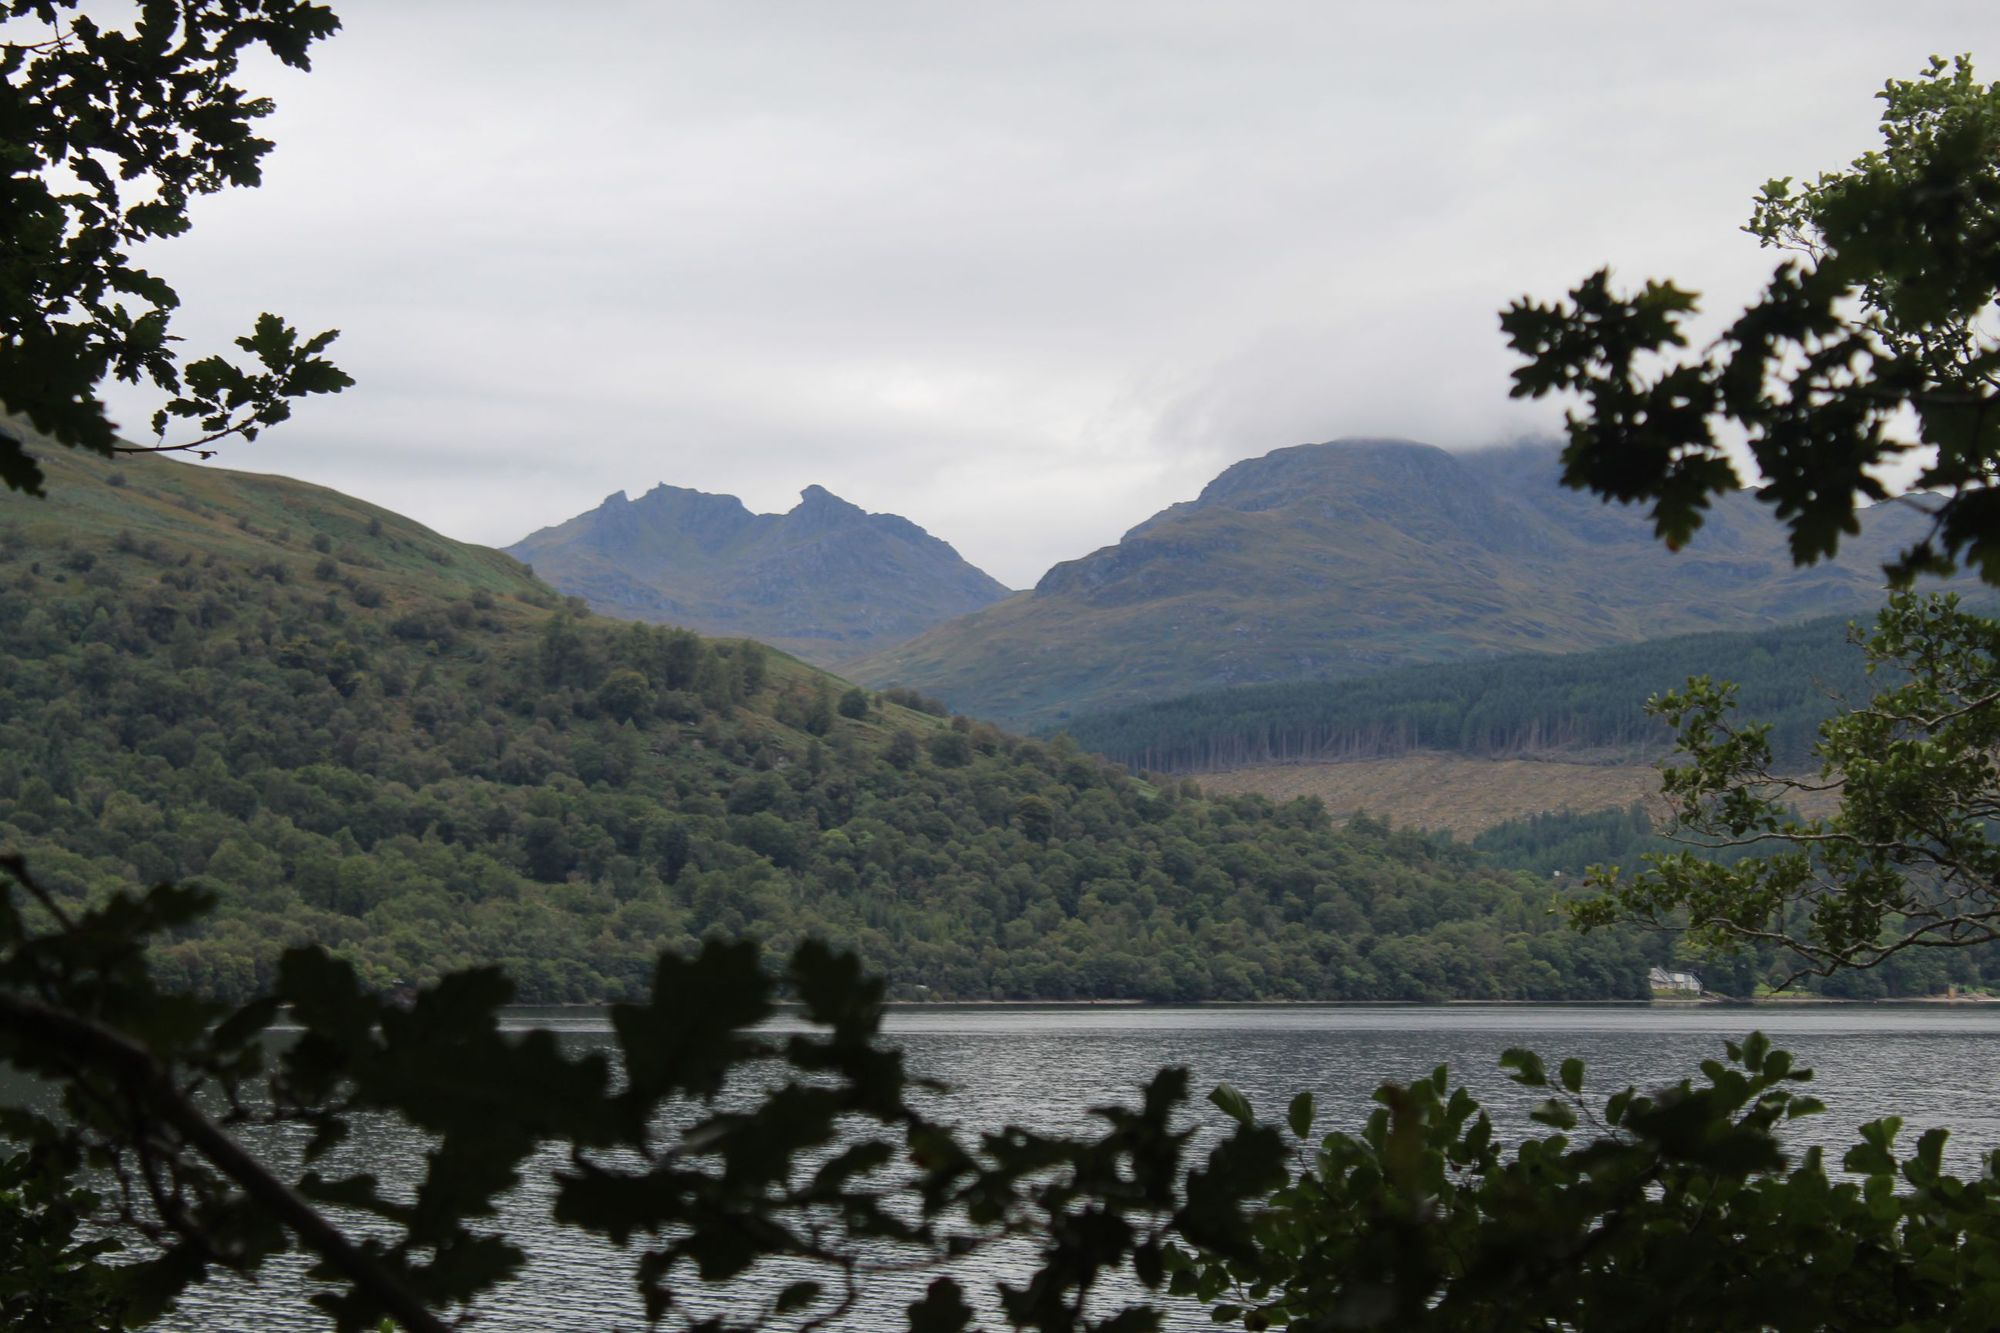 A view of The Cobbler from the West Highland Way long distance walking trail